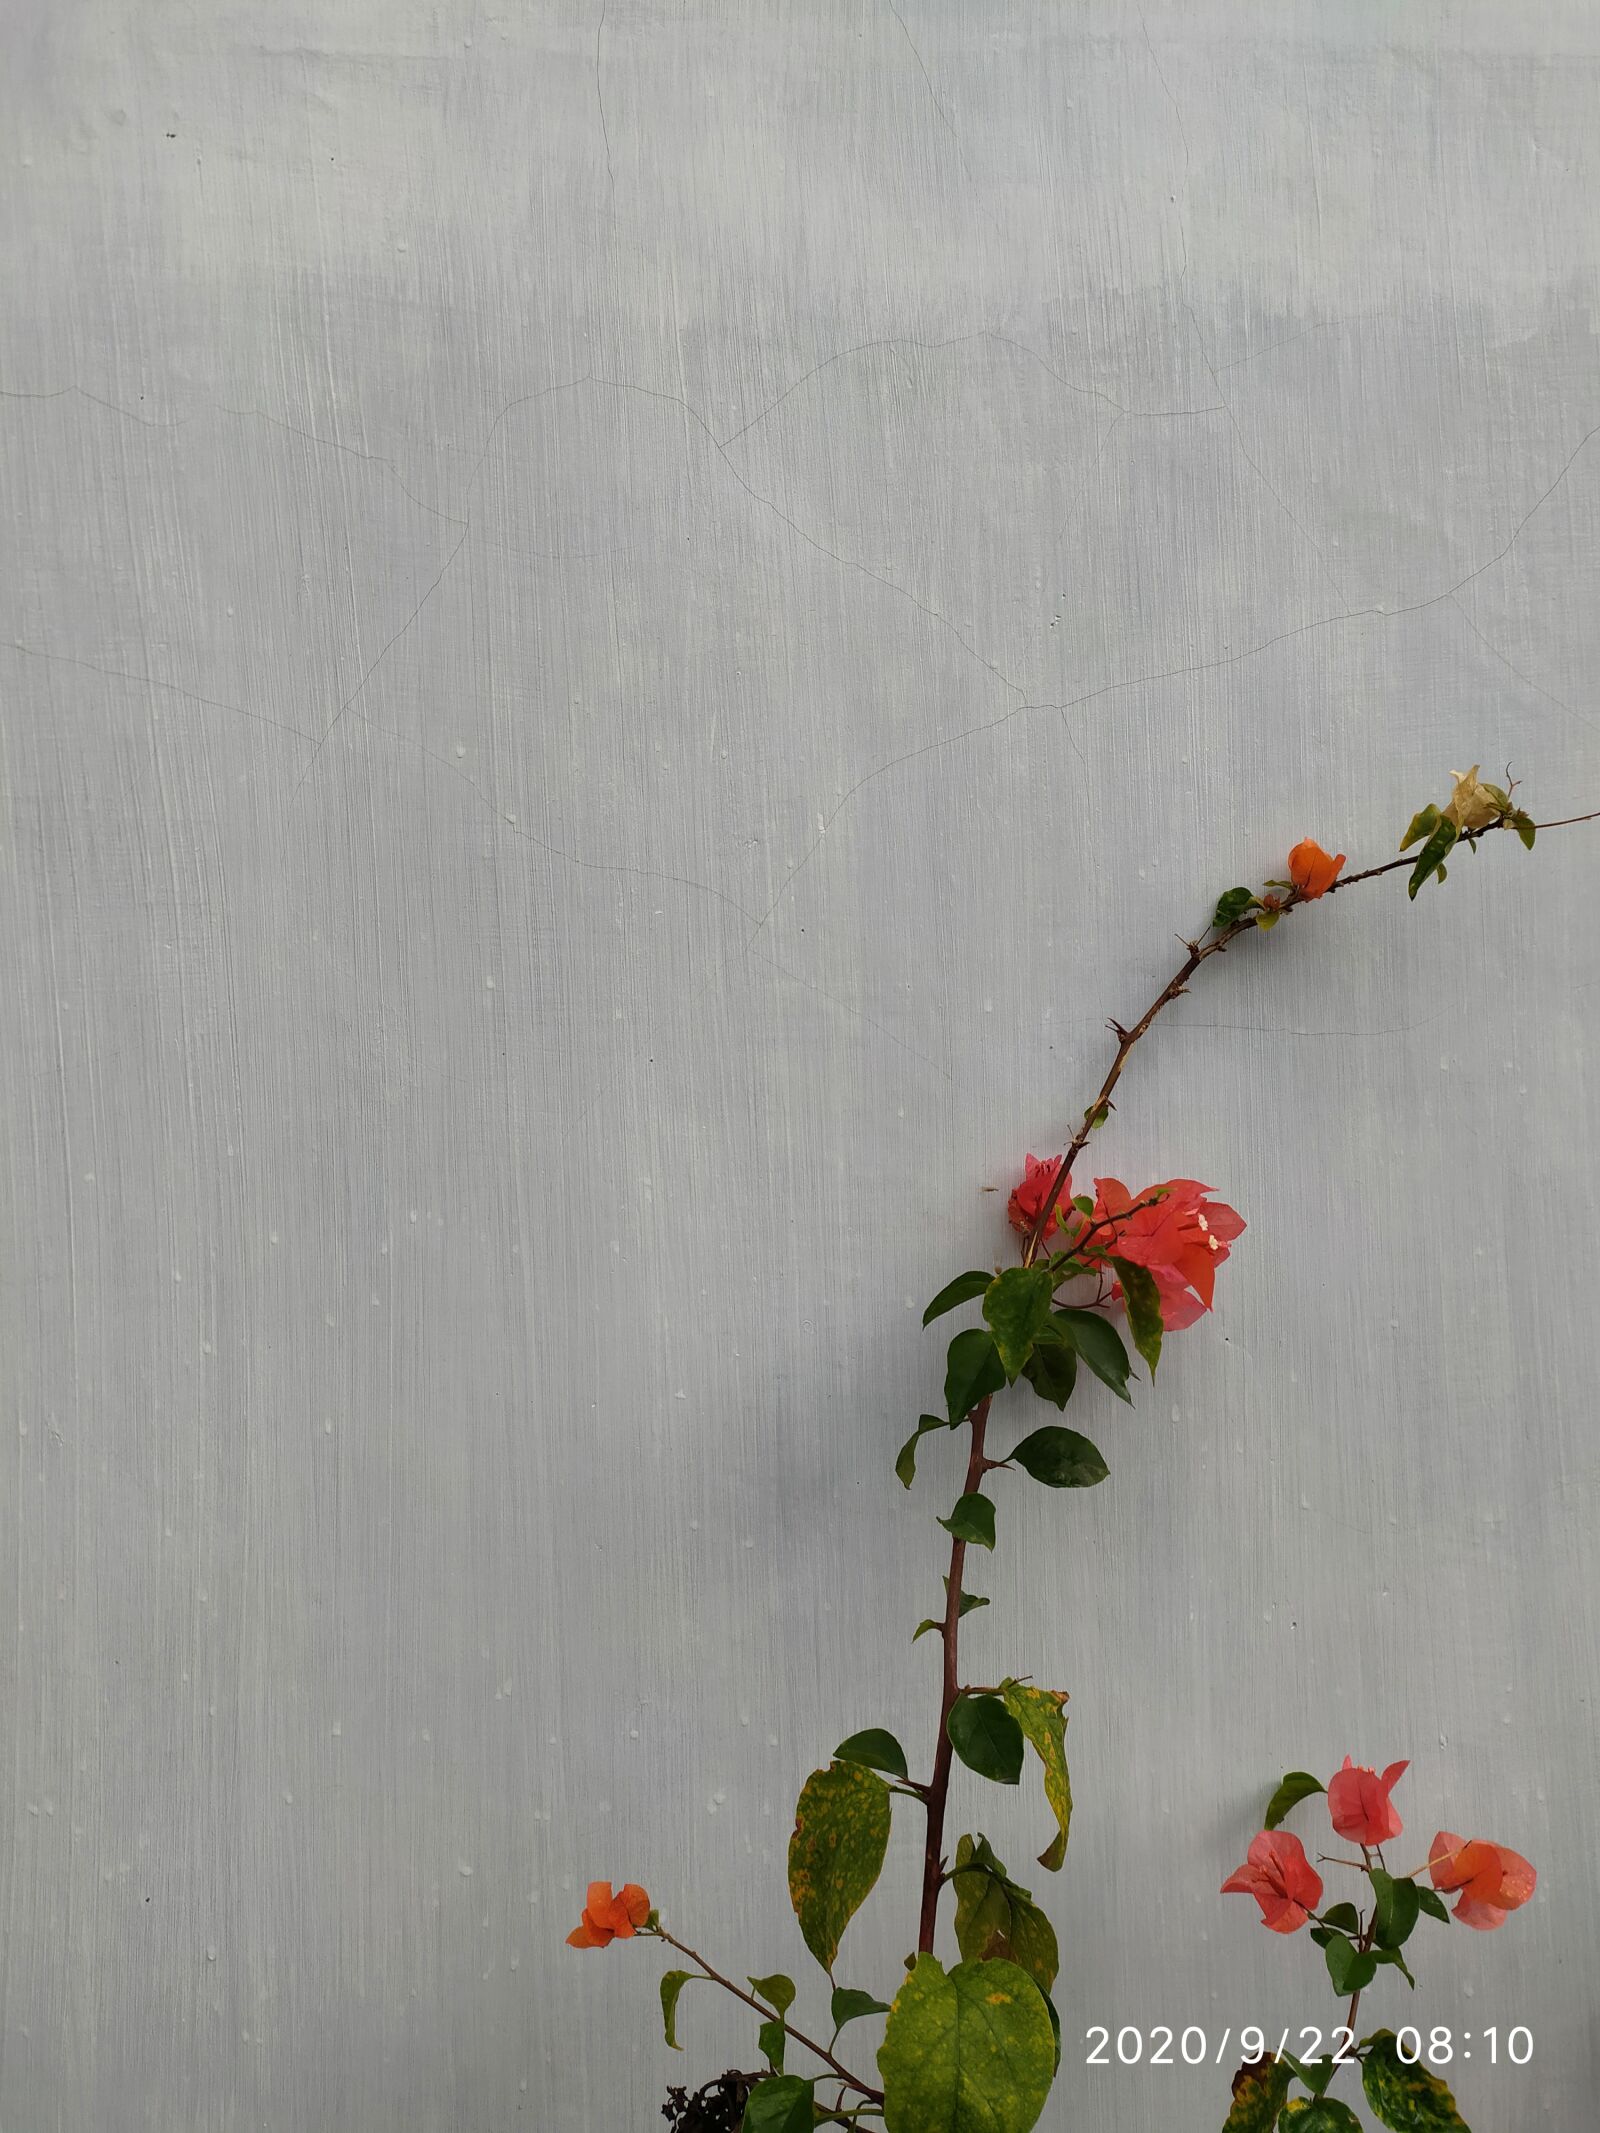 Xiaomi Redmi Note 8 sample photo. Flower, blossom, wall photography